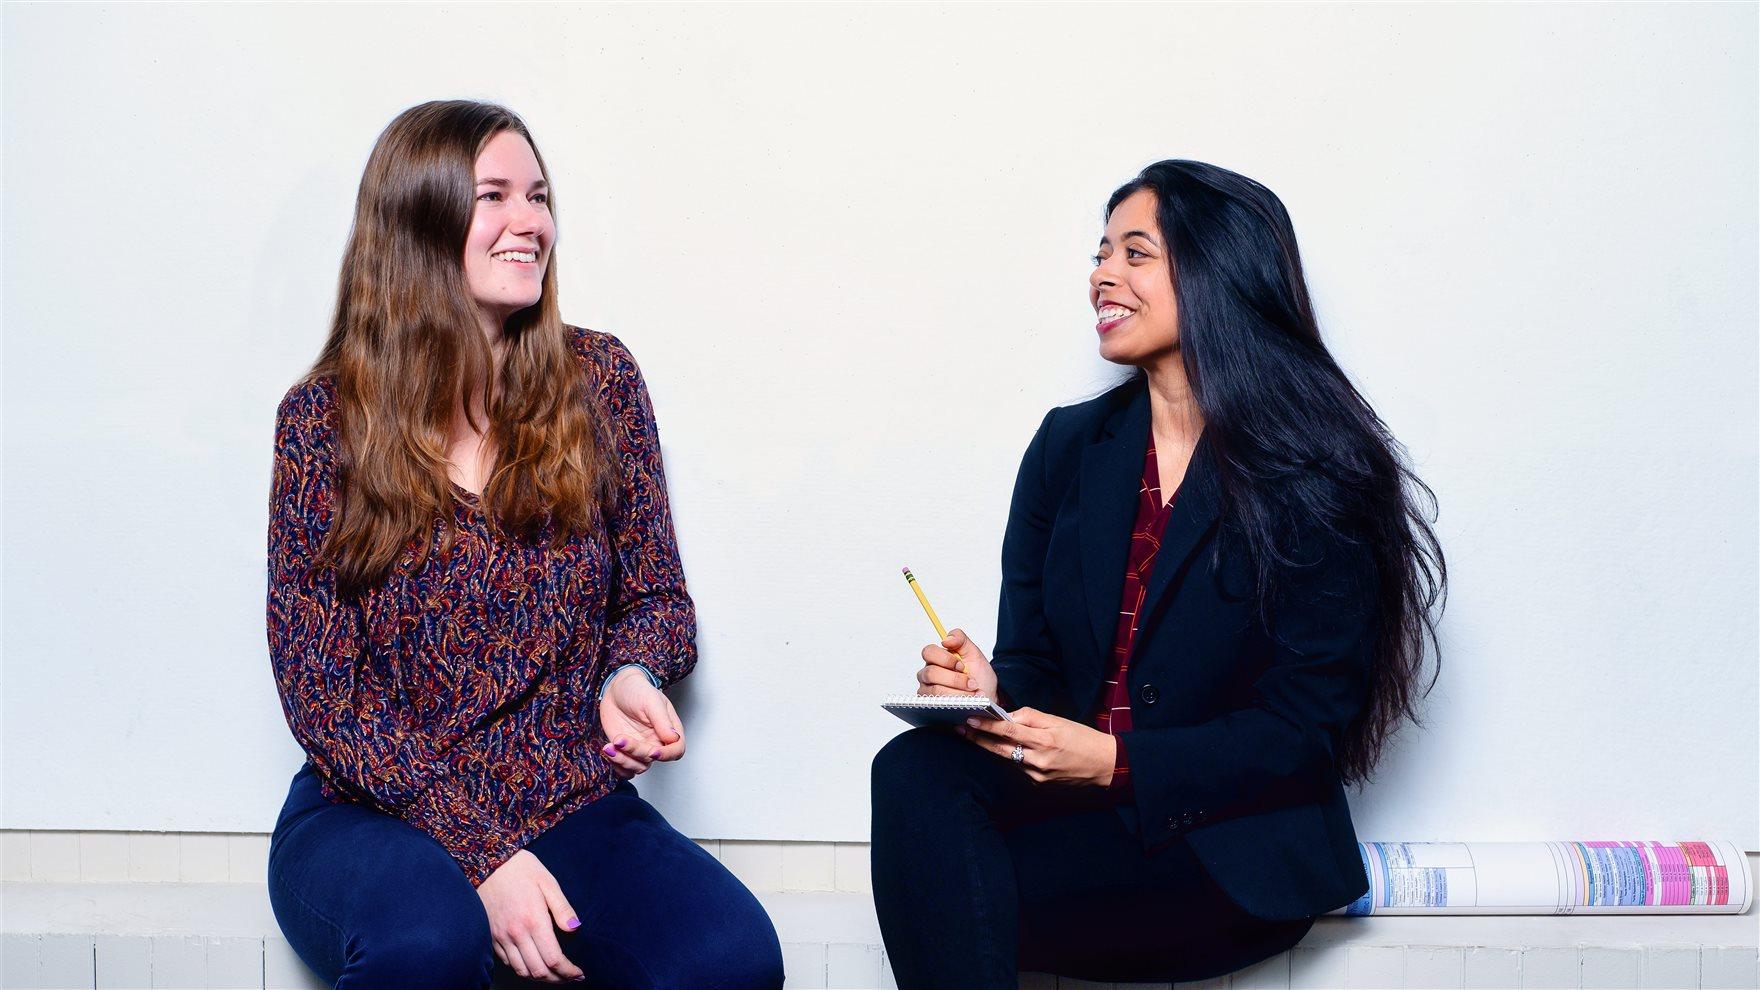 Raisa Sharif, a second-year computer engineering student co-oping at SEPTA, and Taylor LaFountain, a fourth-year architectural and civil engineering student co-oping at Philadelphia Parks & Recreation, interviewing each other 